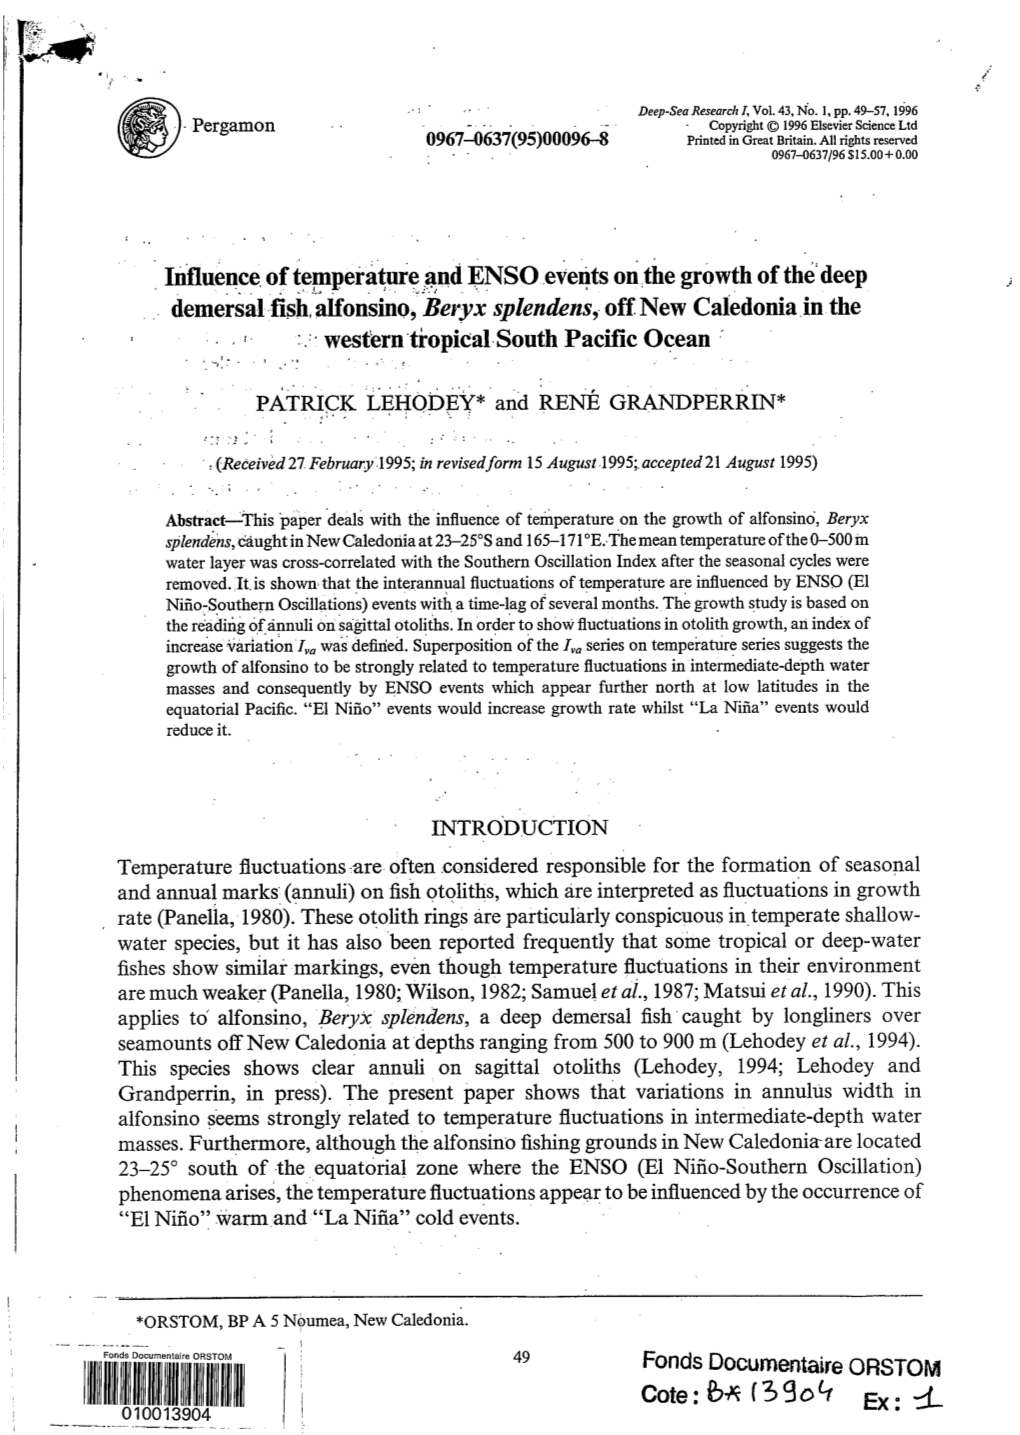 Influence of Temperature and ENSO Events on the Growth of the Deep Demersal Fish,’Alfonsino,$Eryx Splendens, Off New Caledonia in The